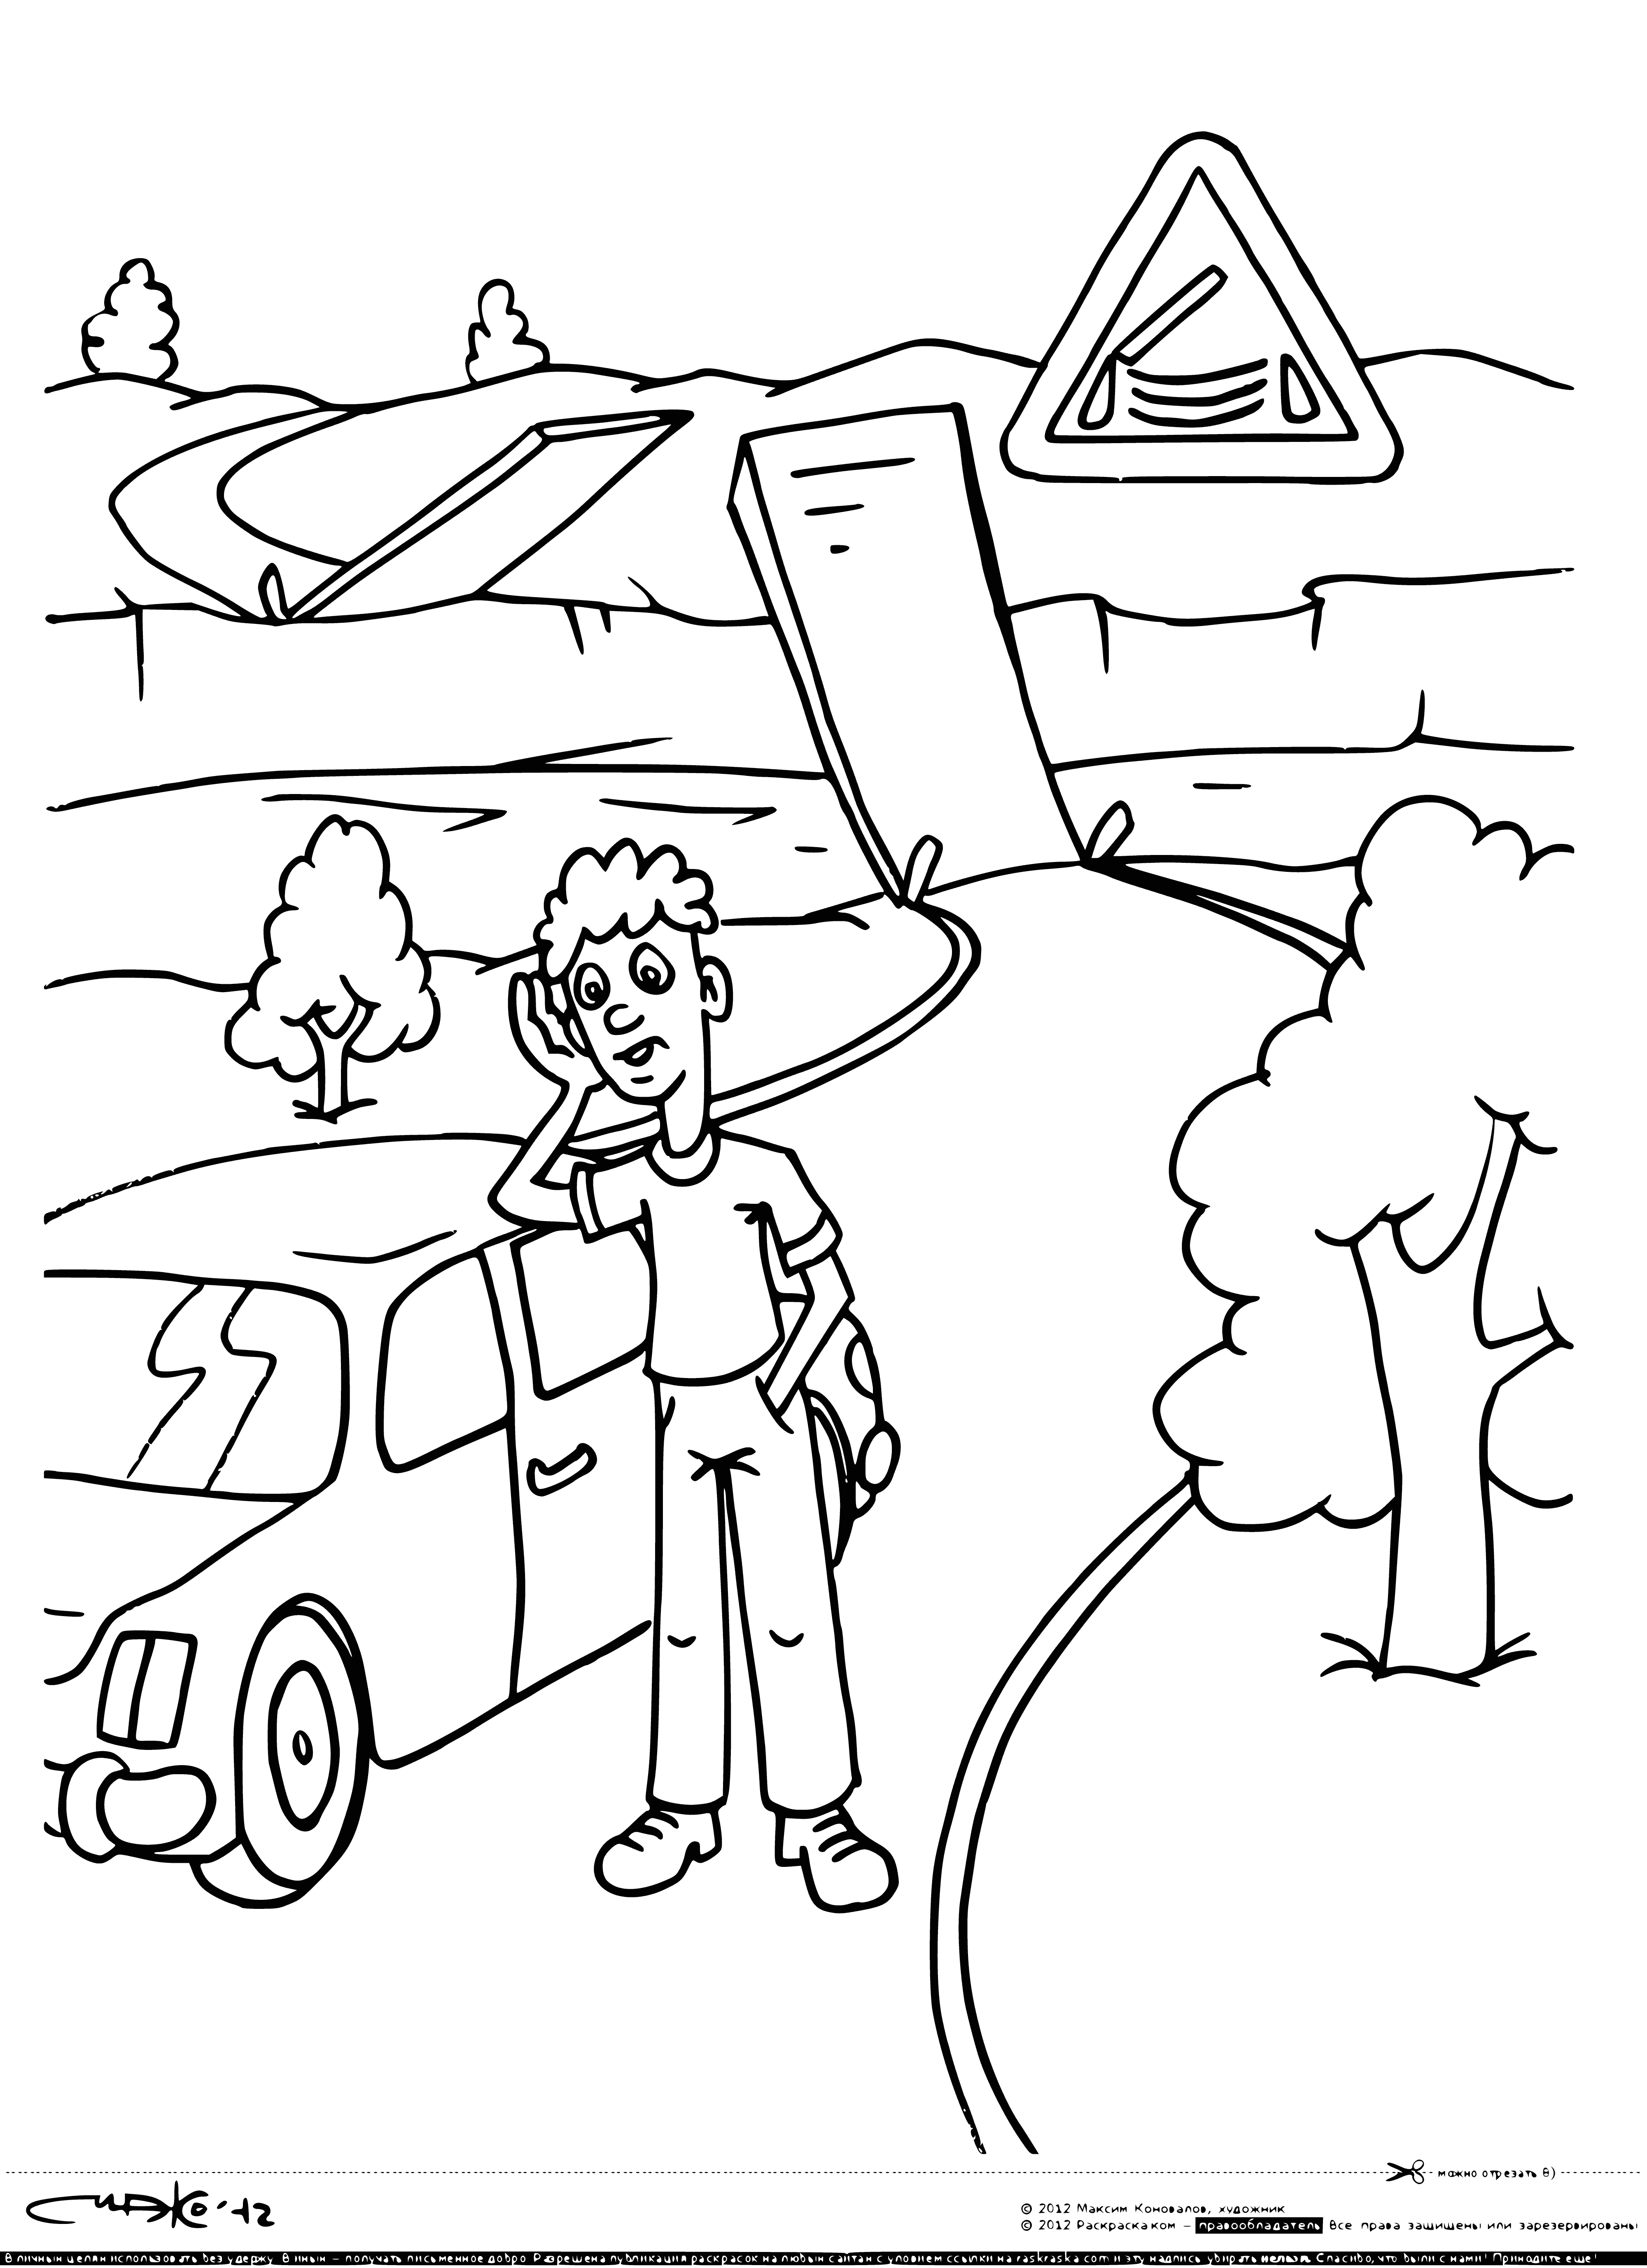 coloring page: Road sign: "Traffic Rules - Drawbridge". Arrow & sketch show left turn when bridge is up.